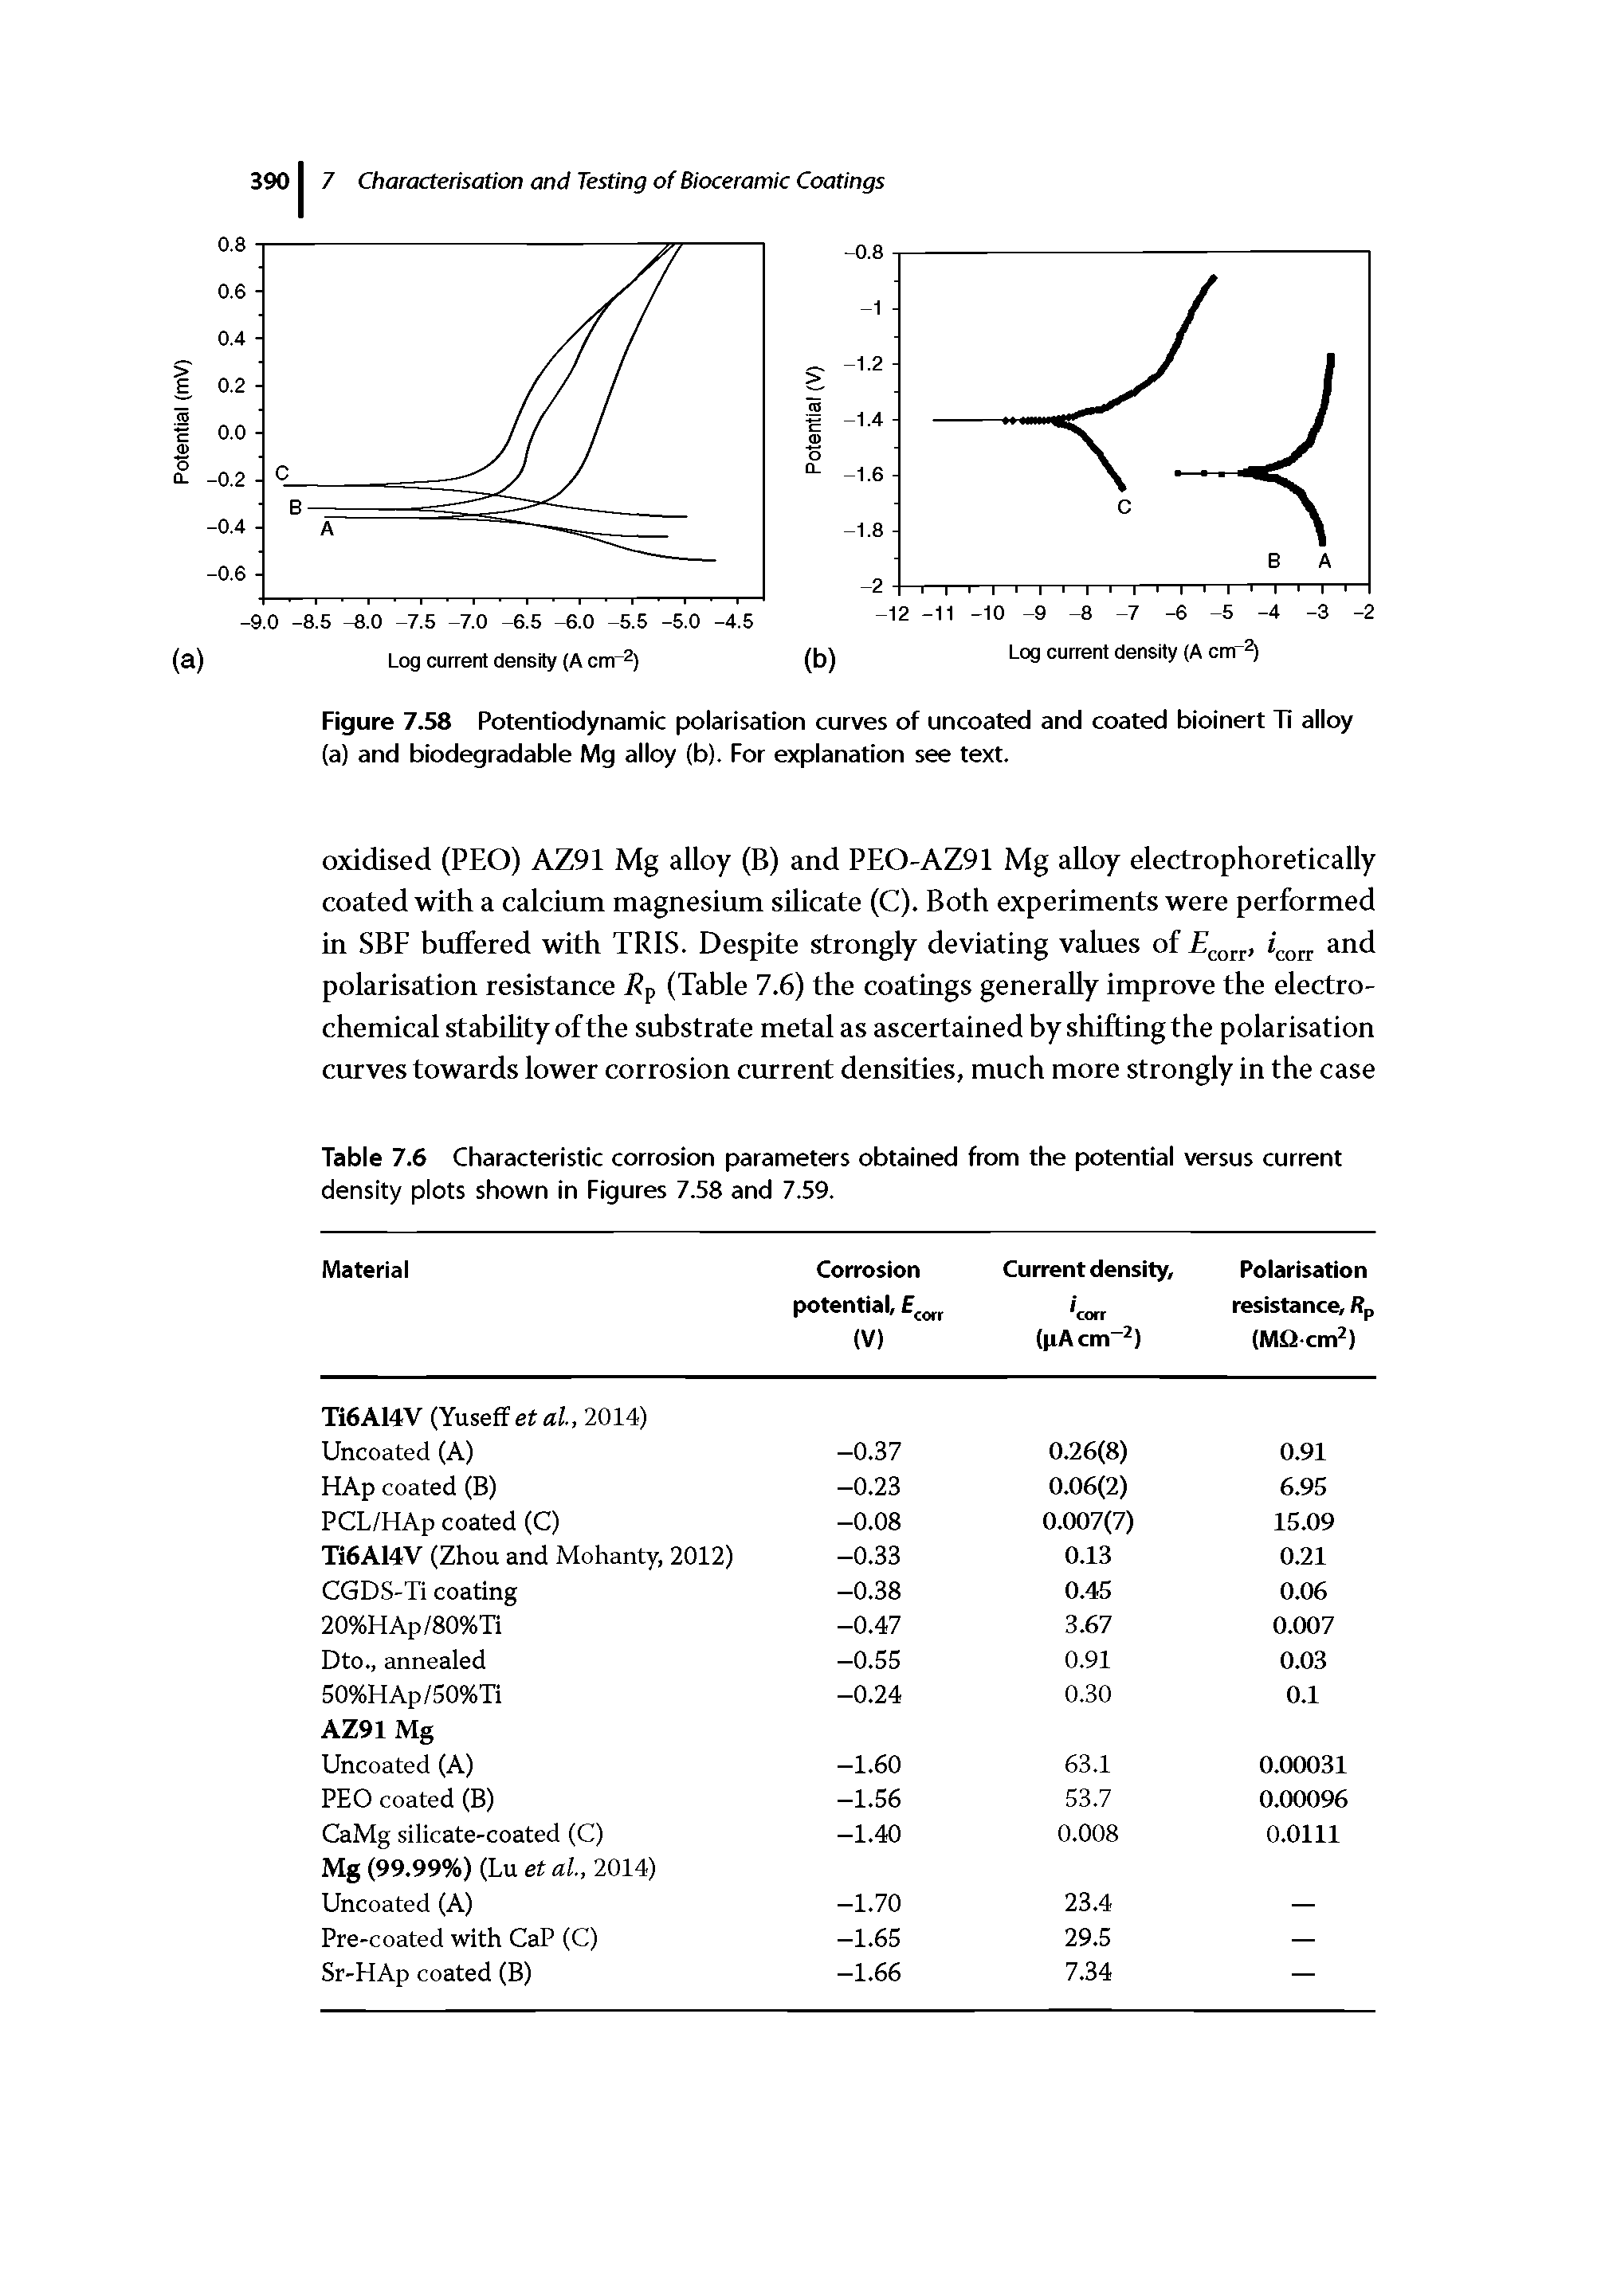 Table 7.6 Characteristic corrosion parameters obtained from the potential versus current density plots shown in Figures 7.58 and 7.59.